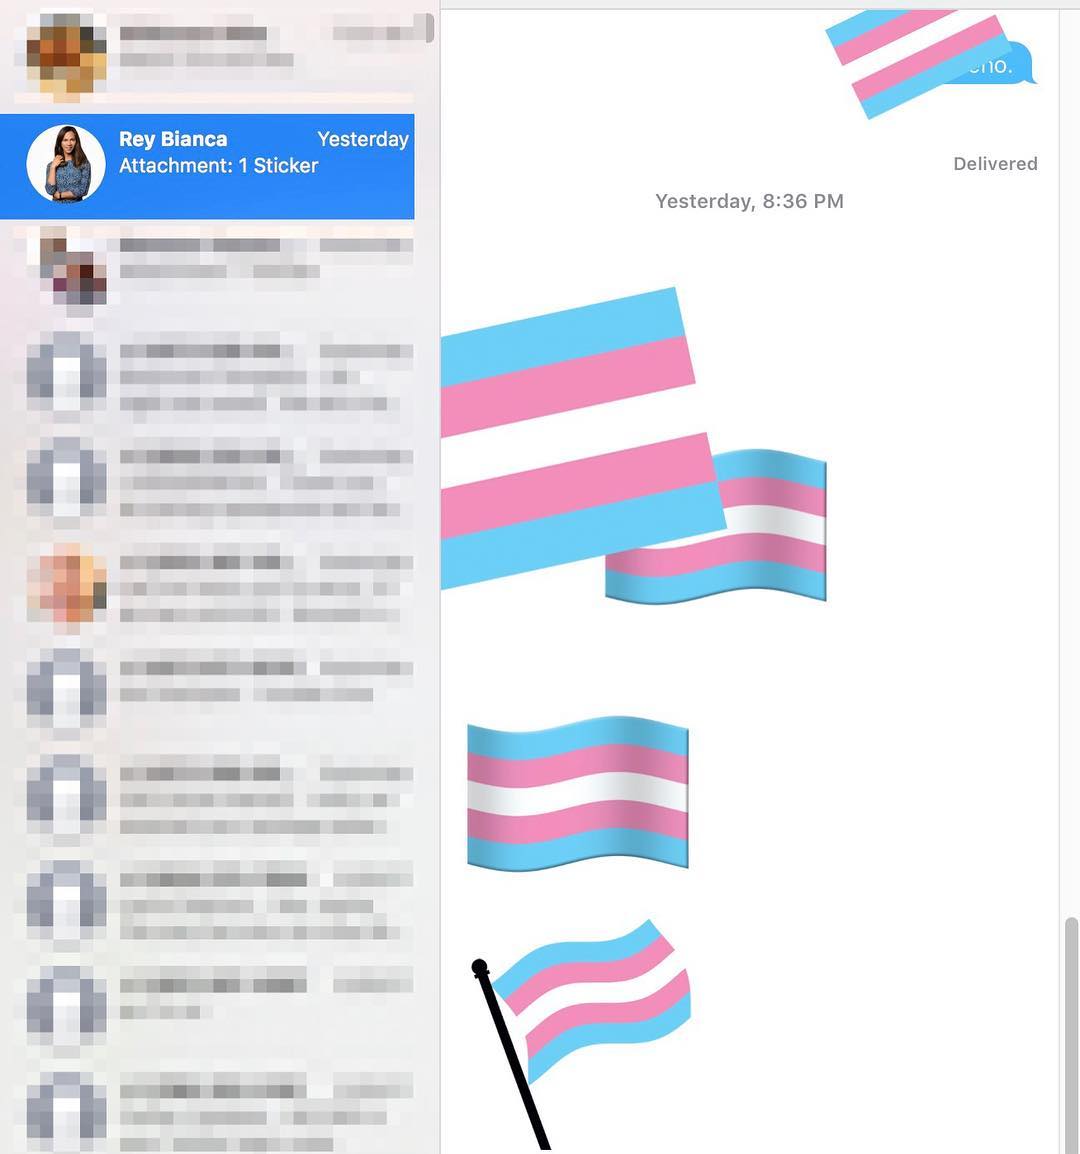 iMessage full of pride, smiles ear to ear when I see great people who are visible and amazing. . App submitted to iTunes waiting for approval ✌️ #TransVisibility #transpride #transrespect capitaltranspride As Washington, DC goes, so goes the nation